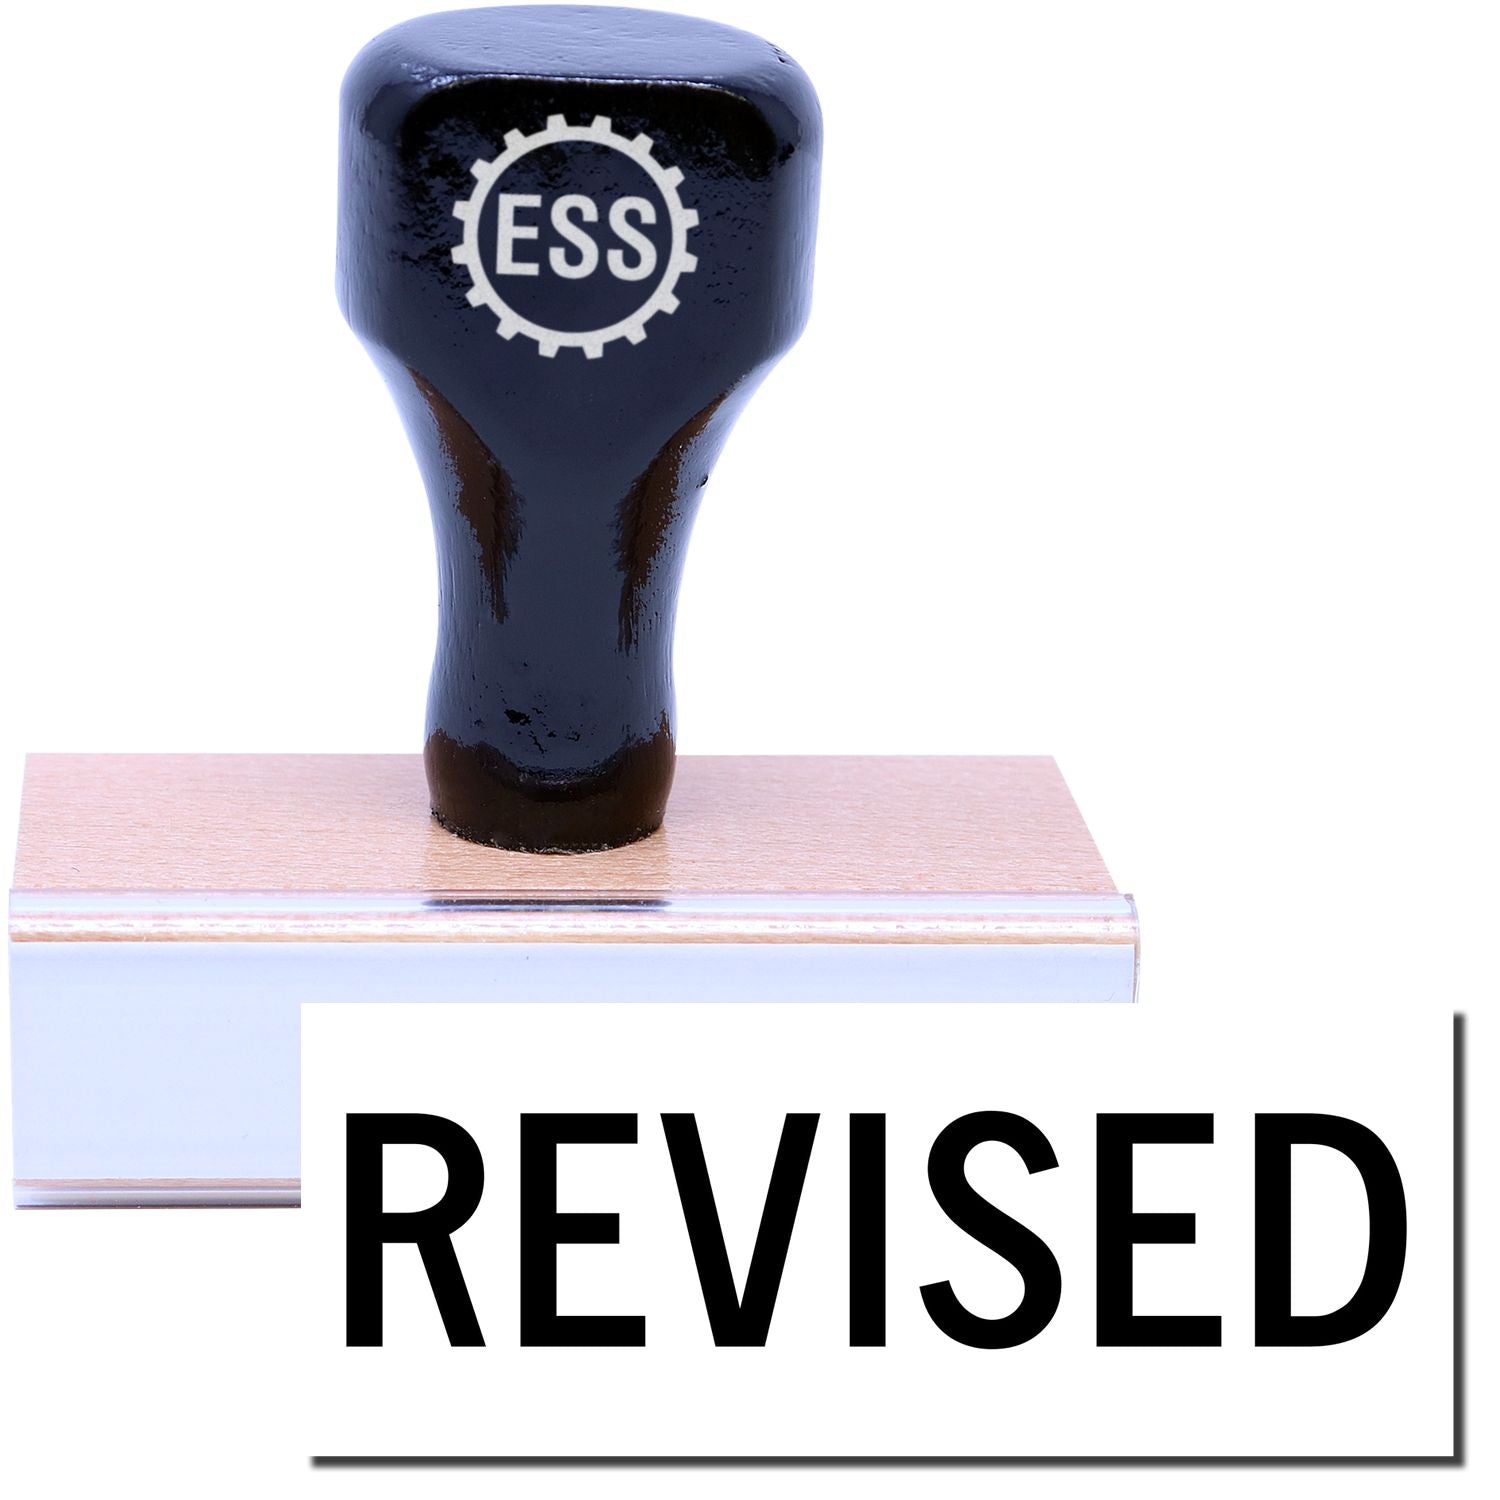 A stock office rubber stamp with a stamped image showing how the text "REVISED" is displayed after stamping.